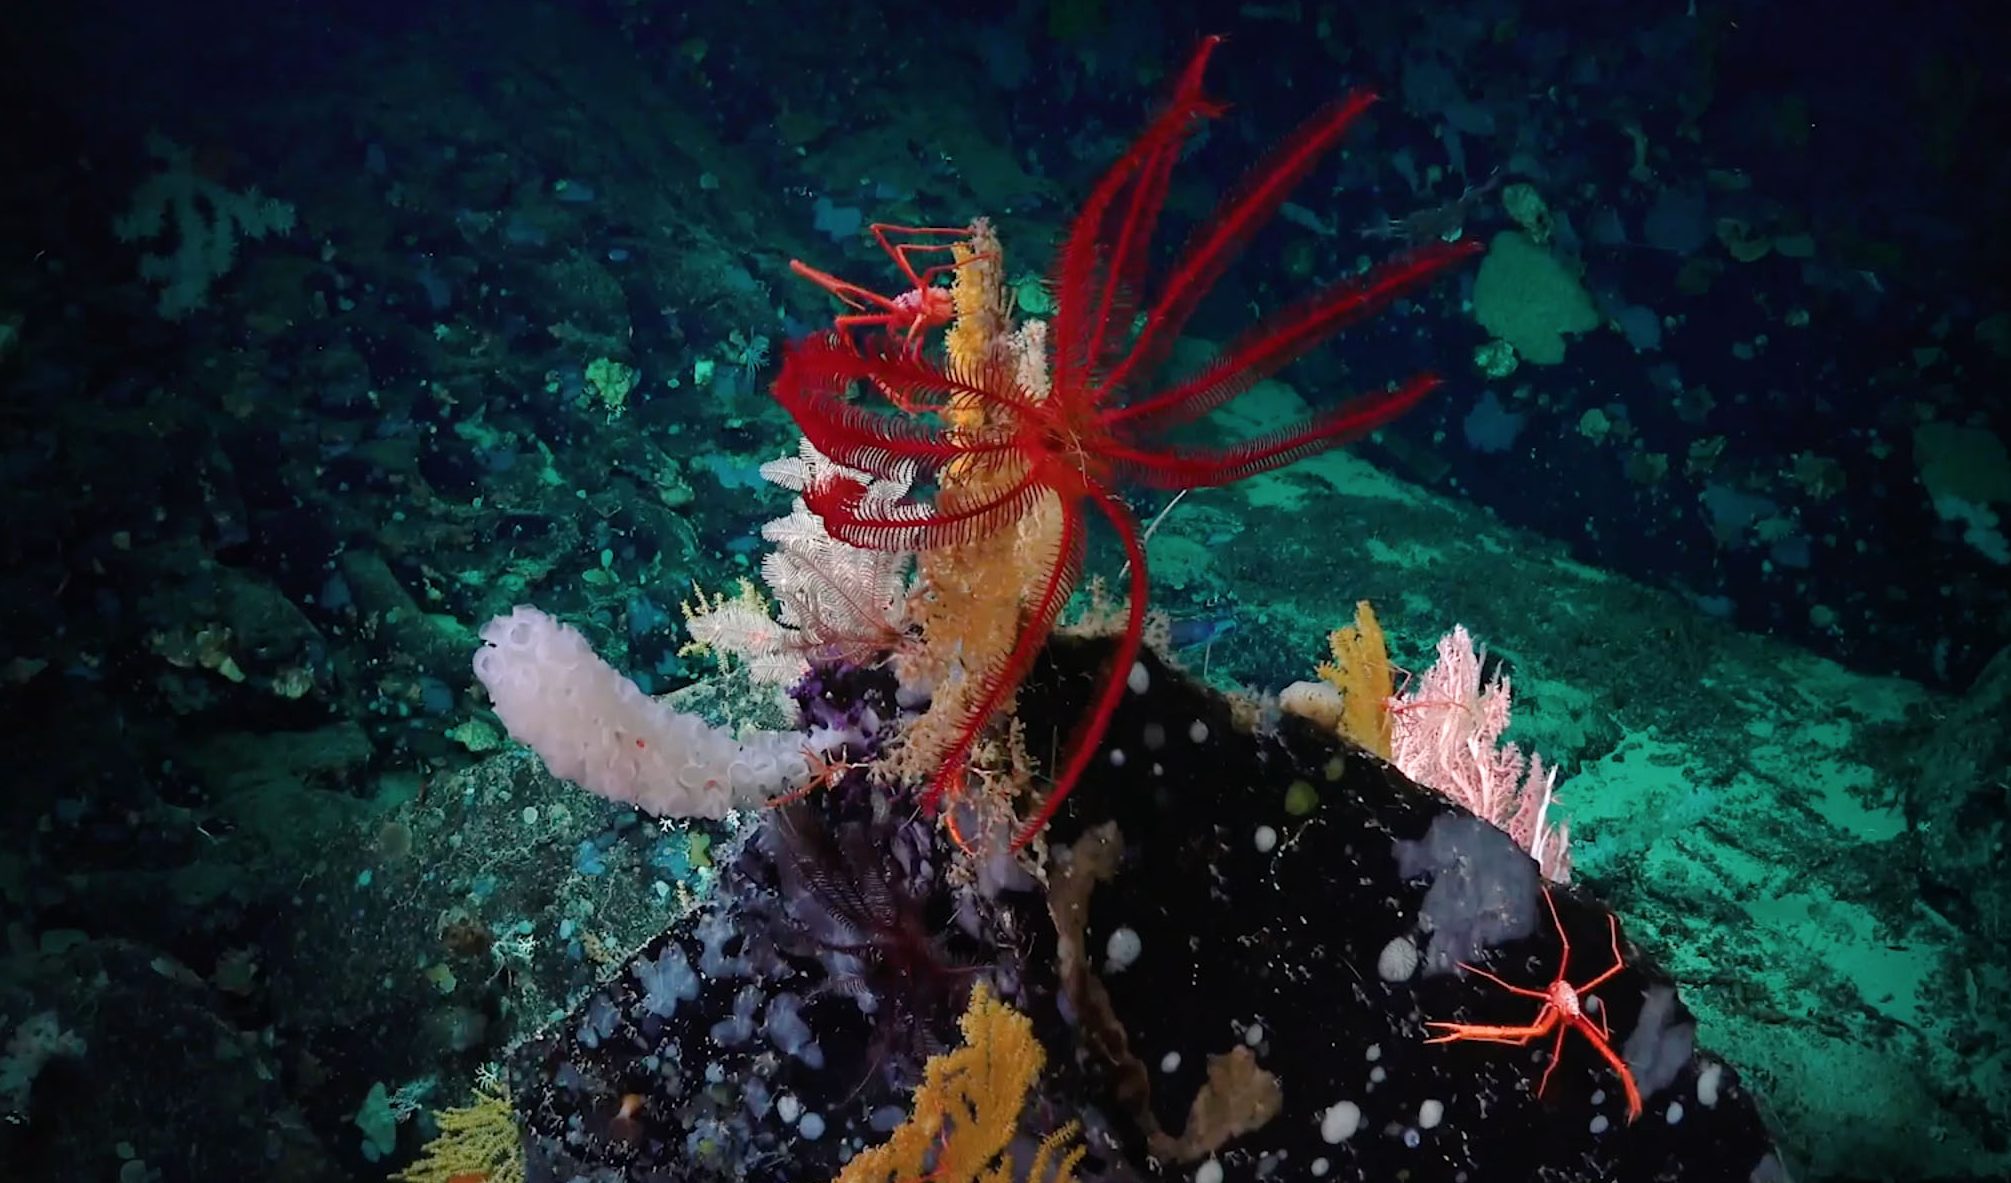 New Deep Sea Animal Discoveries Warrant Expanded Protections in Costa